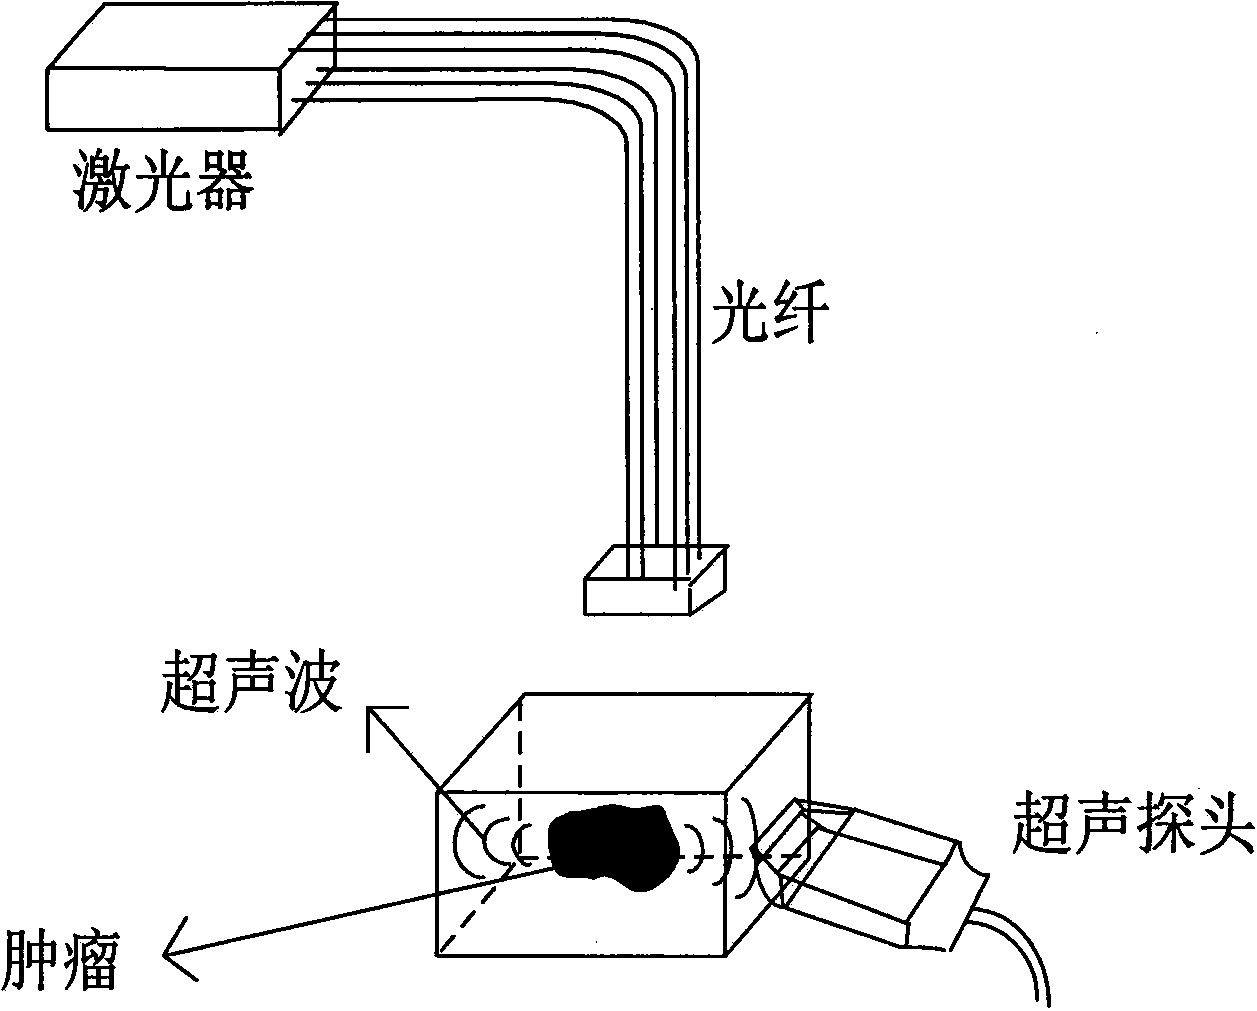 Acoustic velocity correction method for photoacoustic imaging